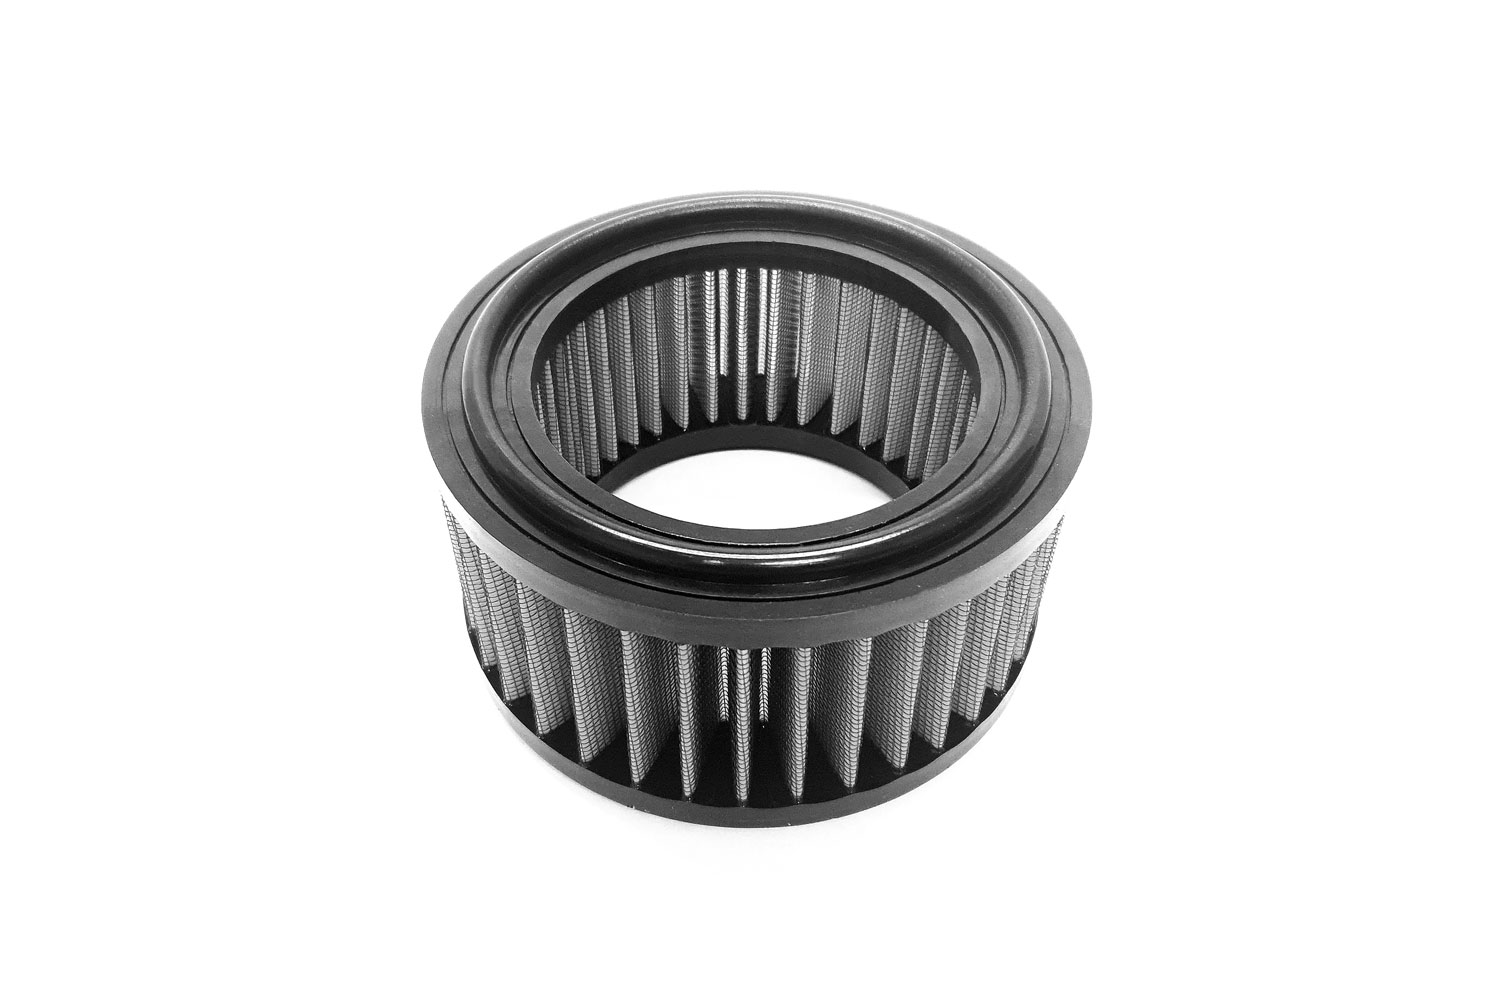 Buy Sprint Filter T12 Royal Enfield Bullet 350/500 (99-07), T-Bird (03-08), Electra (06-08), and Sixty 5 (04-08) SKU: 411107 at the price of US$ 79.98 | BrocksPerformance.com